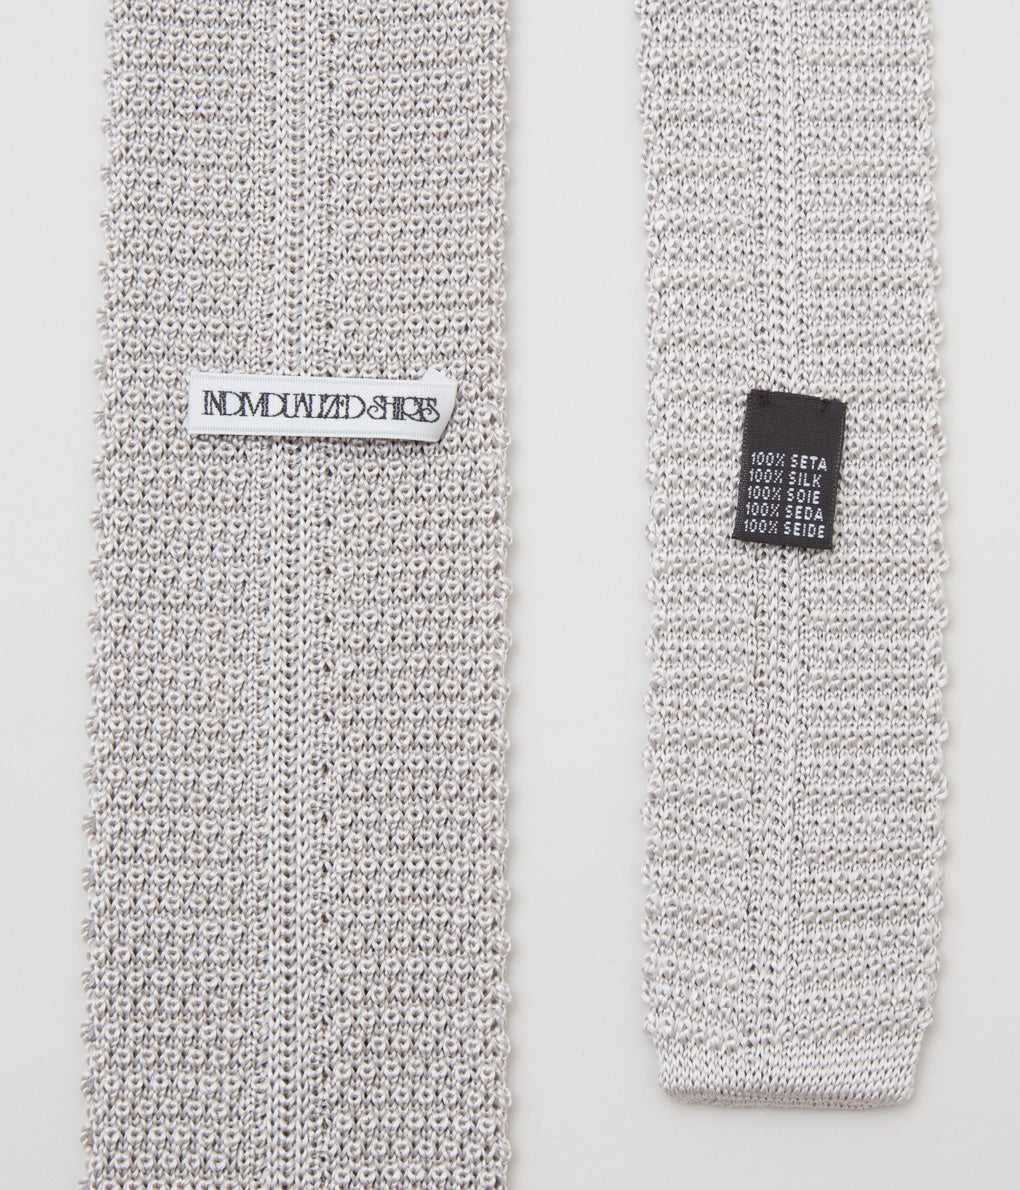 INDIVIDUALIZED ACCESSORIES"KNIT TIE"(SILVER)